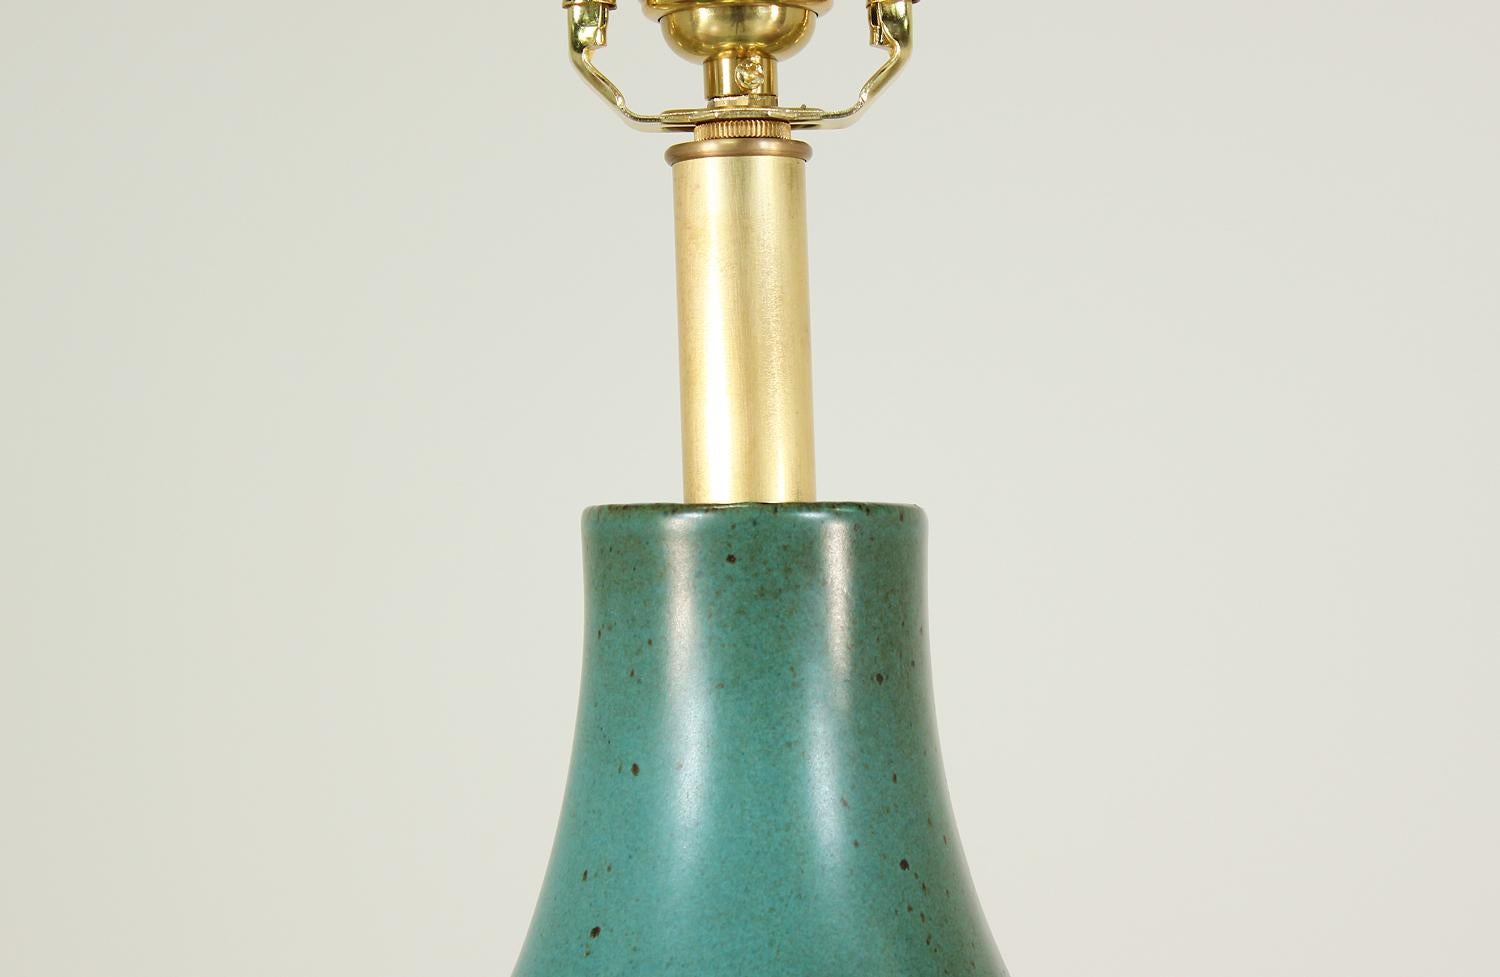 Brass David Cressey Glazed Teal Ceramic Table Lamp for Architectural Pottery